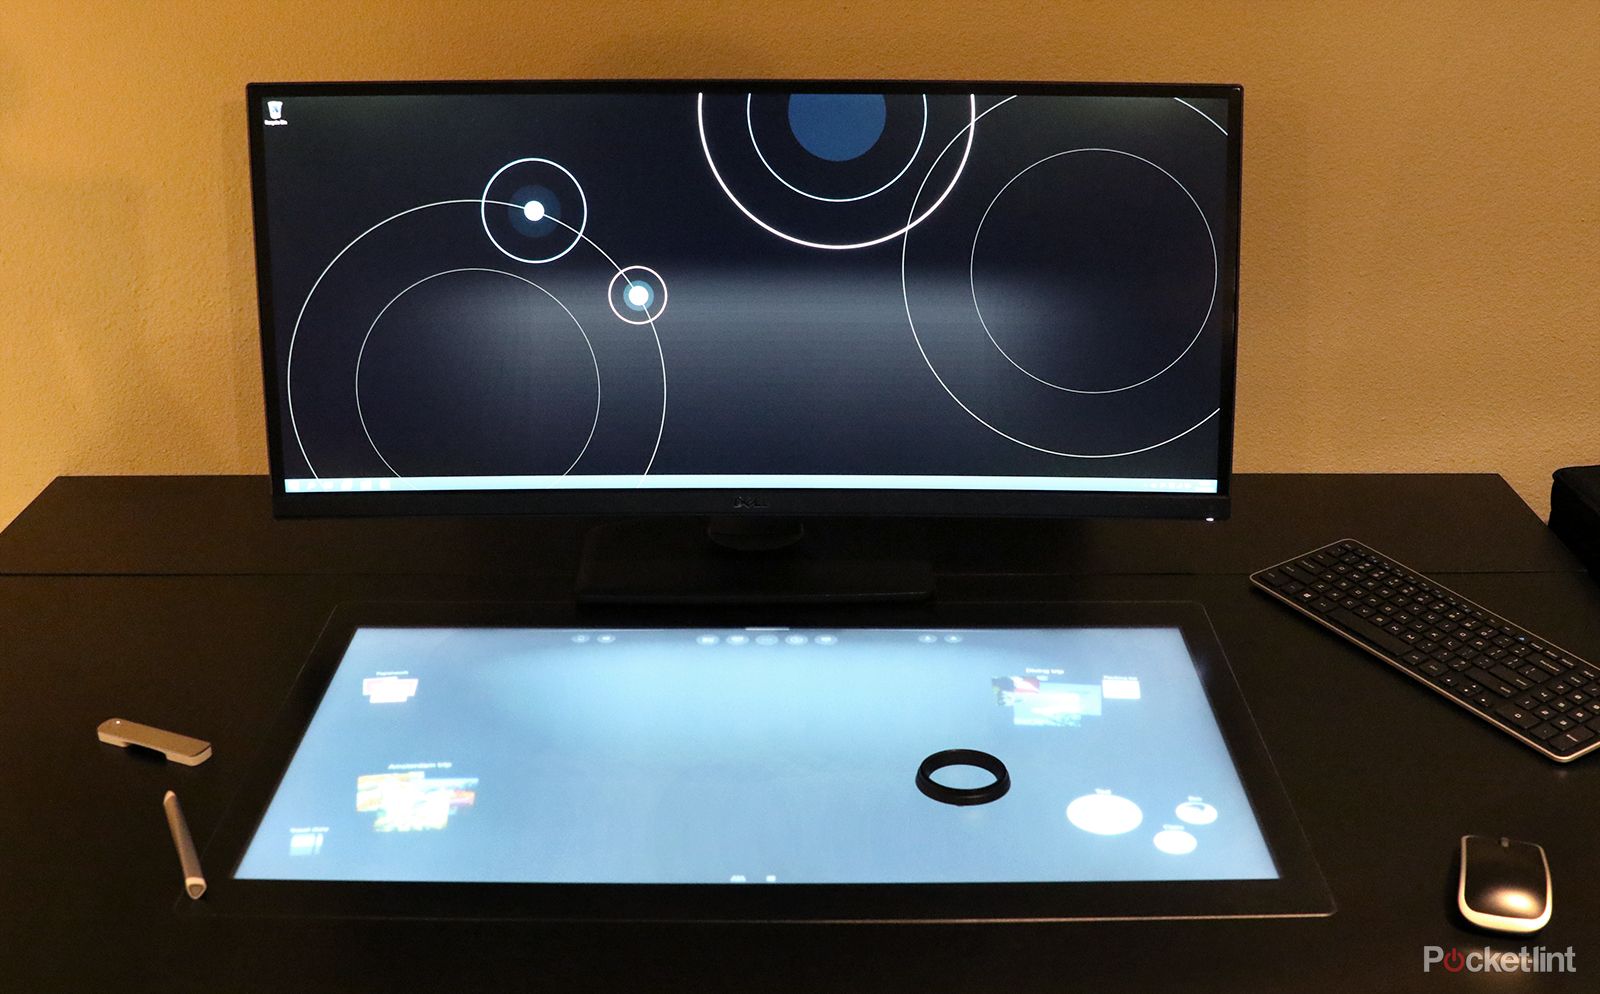 dell smart desk concept taking interactive display technology into the future image 1